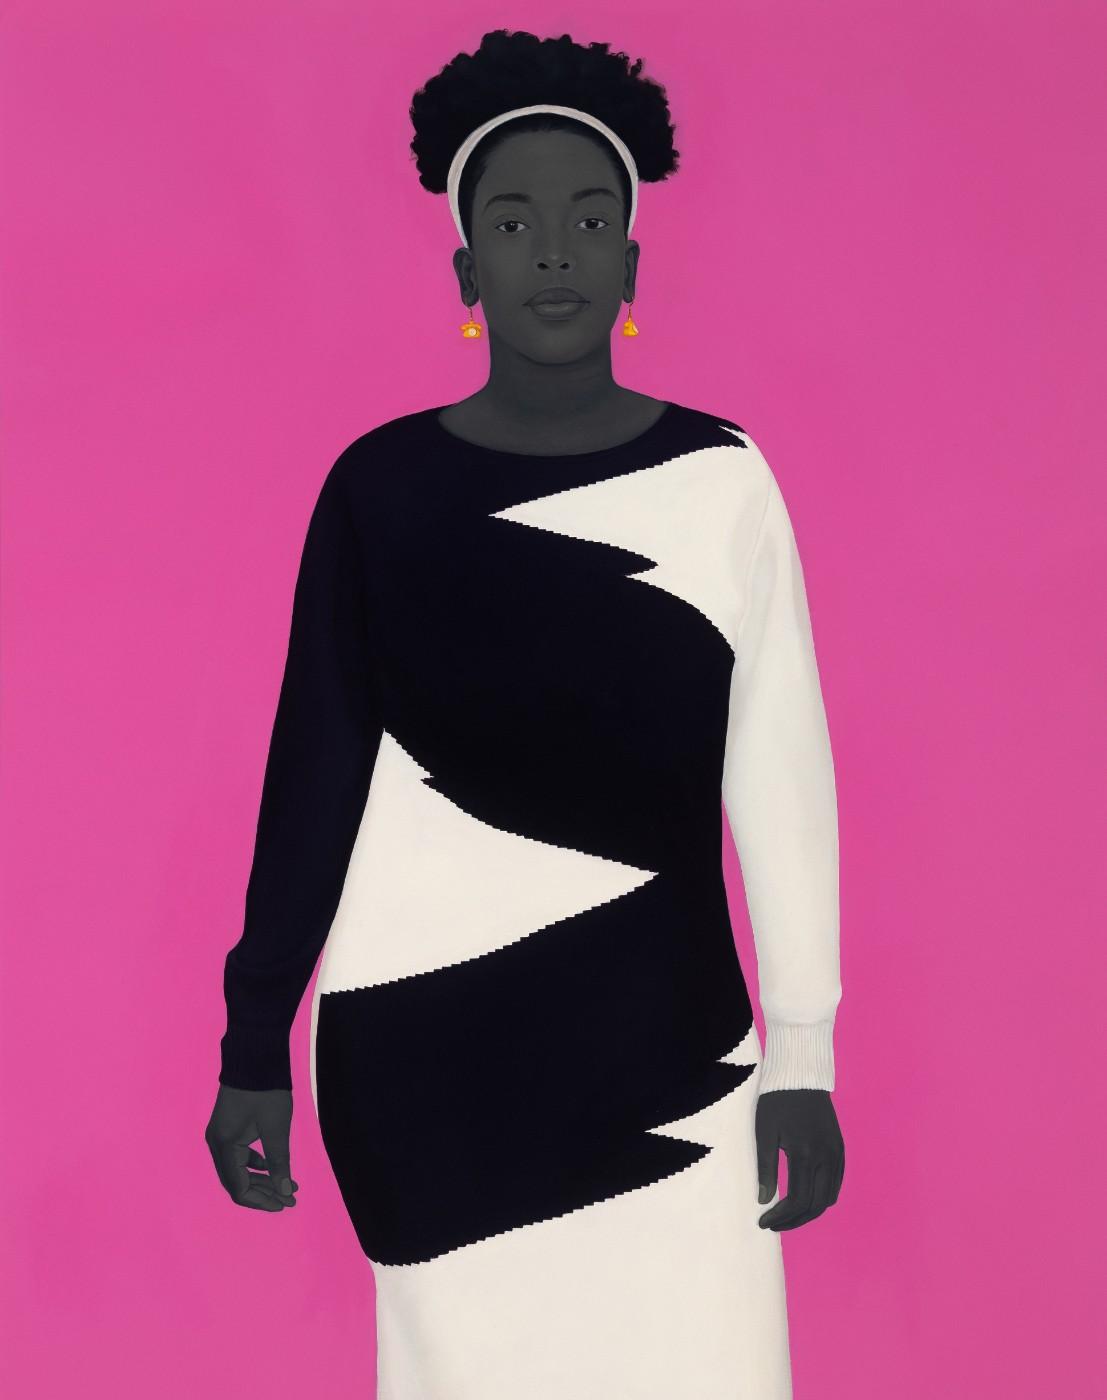 Amy Sherald, Sometimes the king is a woman, 2019